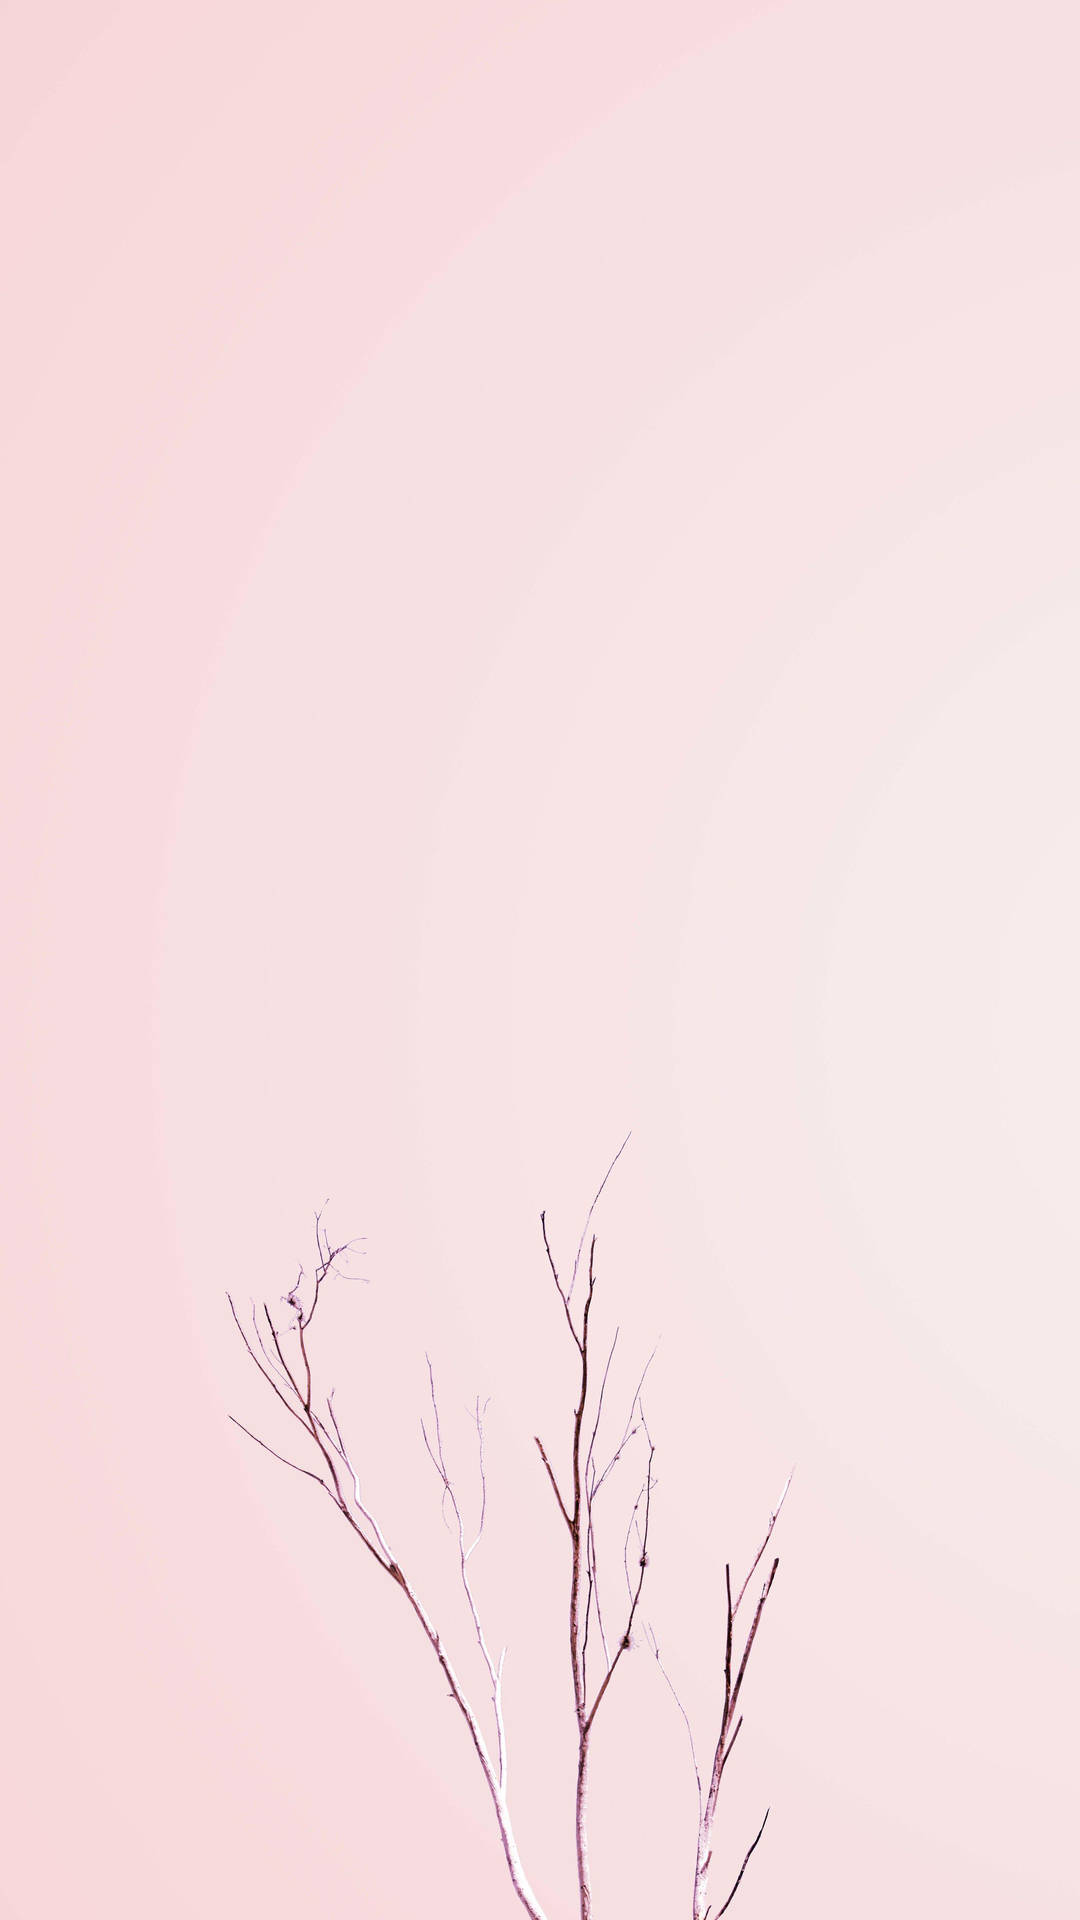 Minimalist Aesthetic Pink Tree Branches